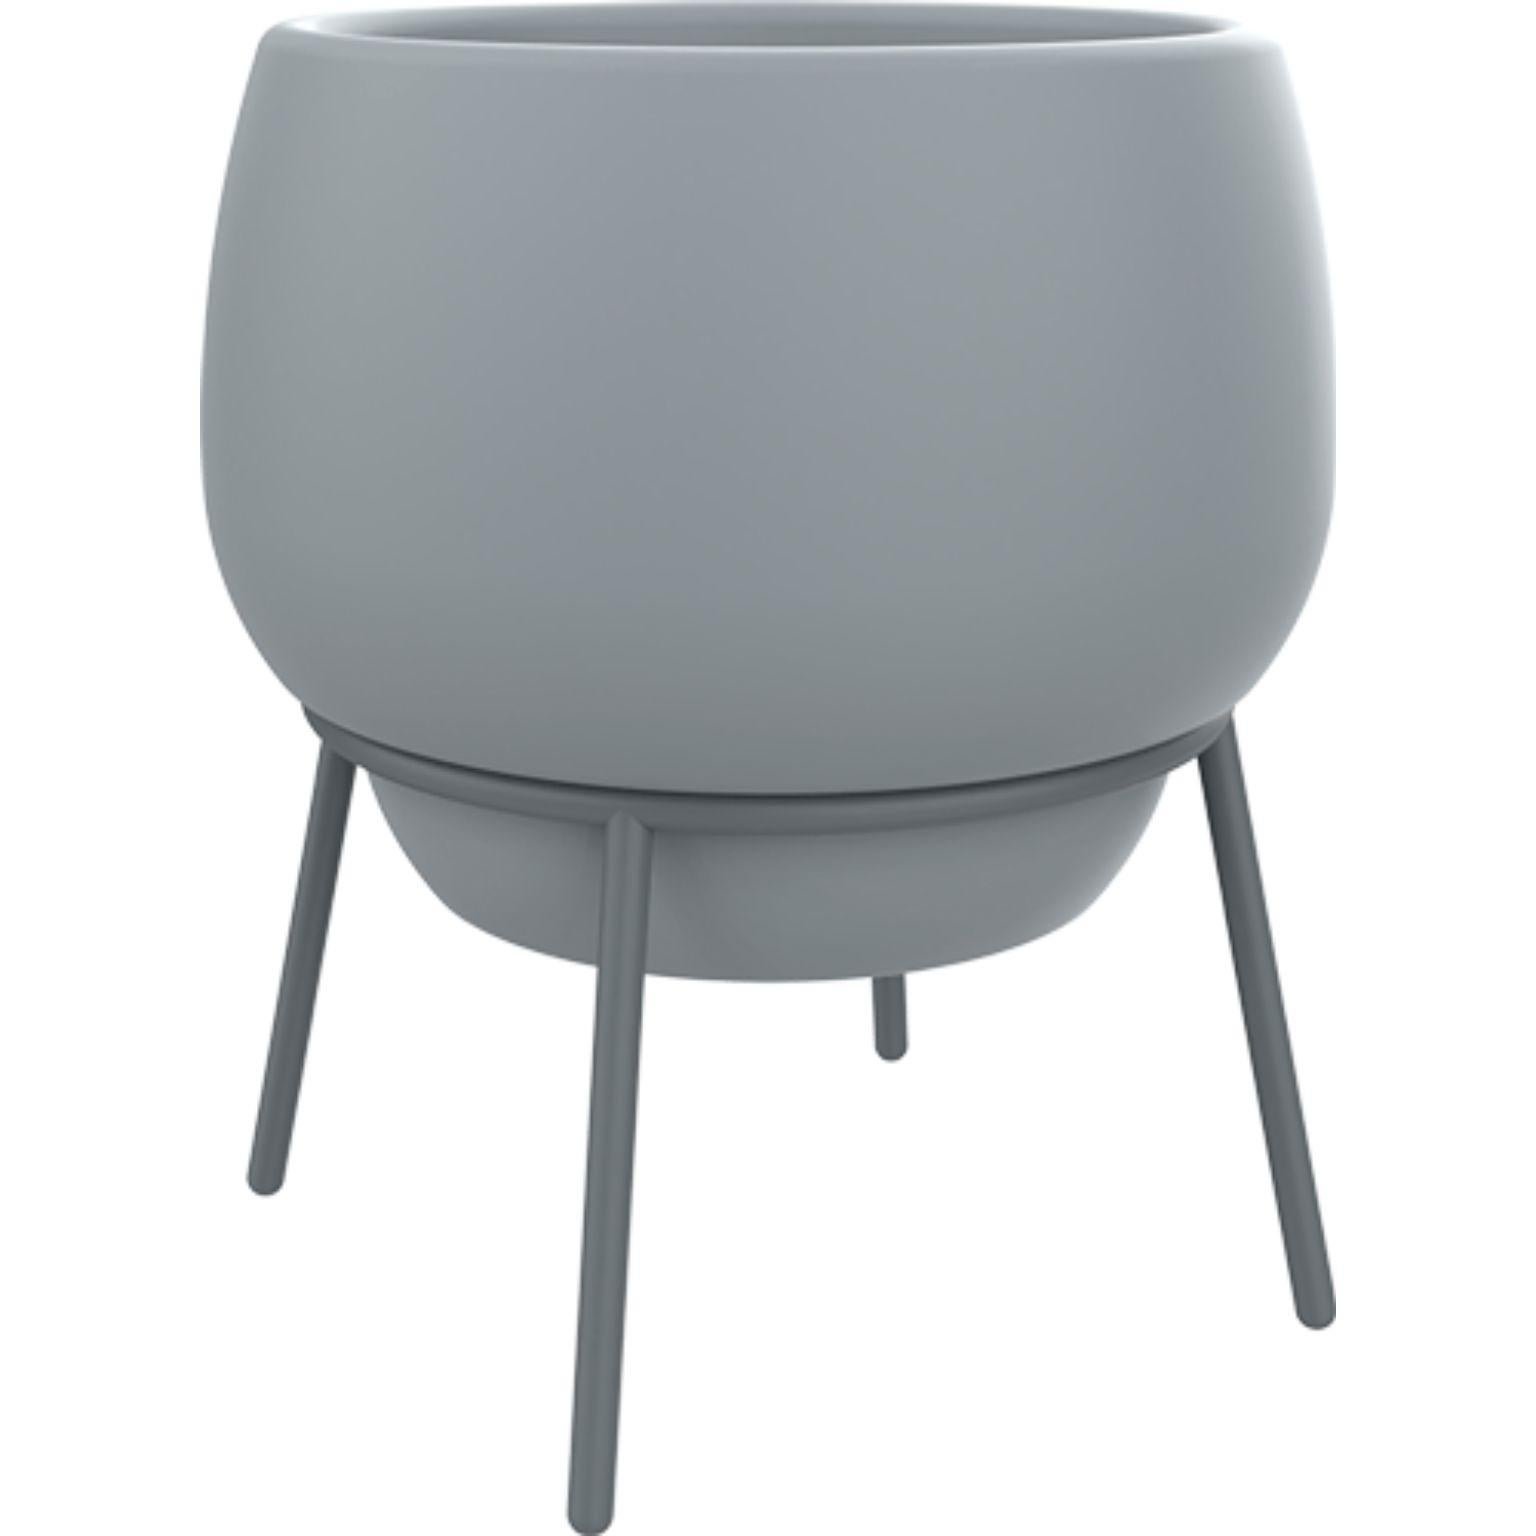 Lace grey 65 pot by Mowee.
Dimensions: Ø71 x H76 cm
Material: Polyethylene and stainless steel.
Weight: 9 kg.
Also available in different colors and finishes (Lacquered or retroilluminated). 

Lace is a collection of furniture made by